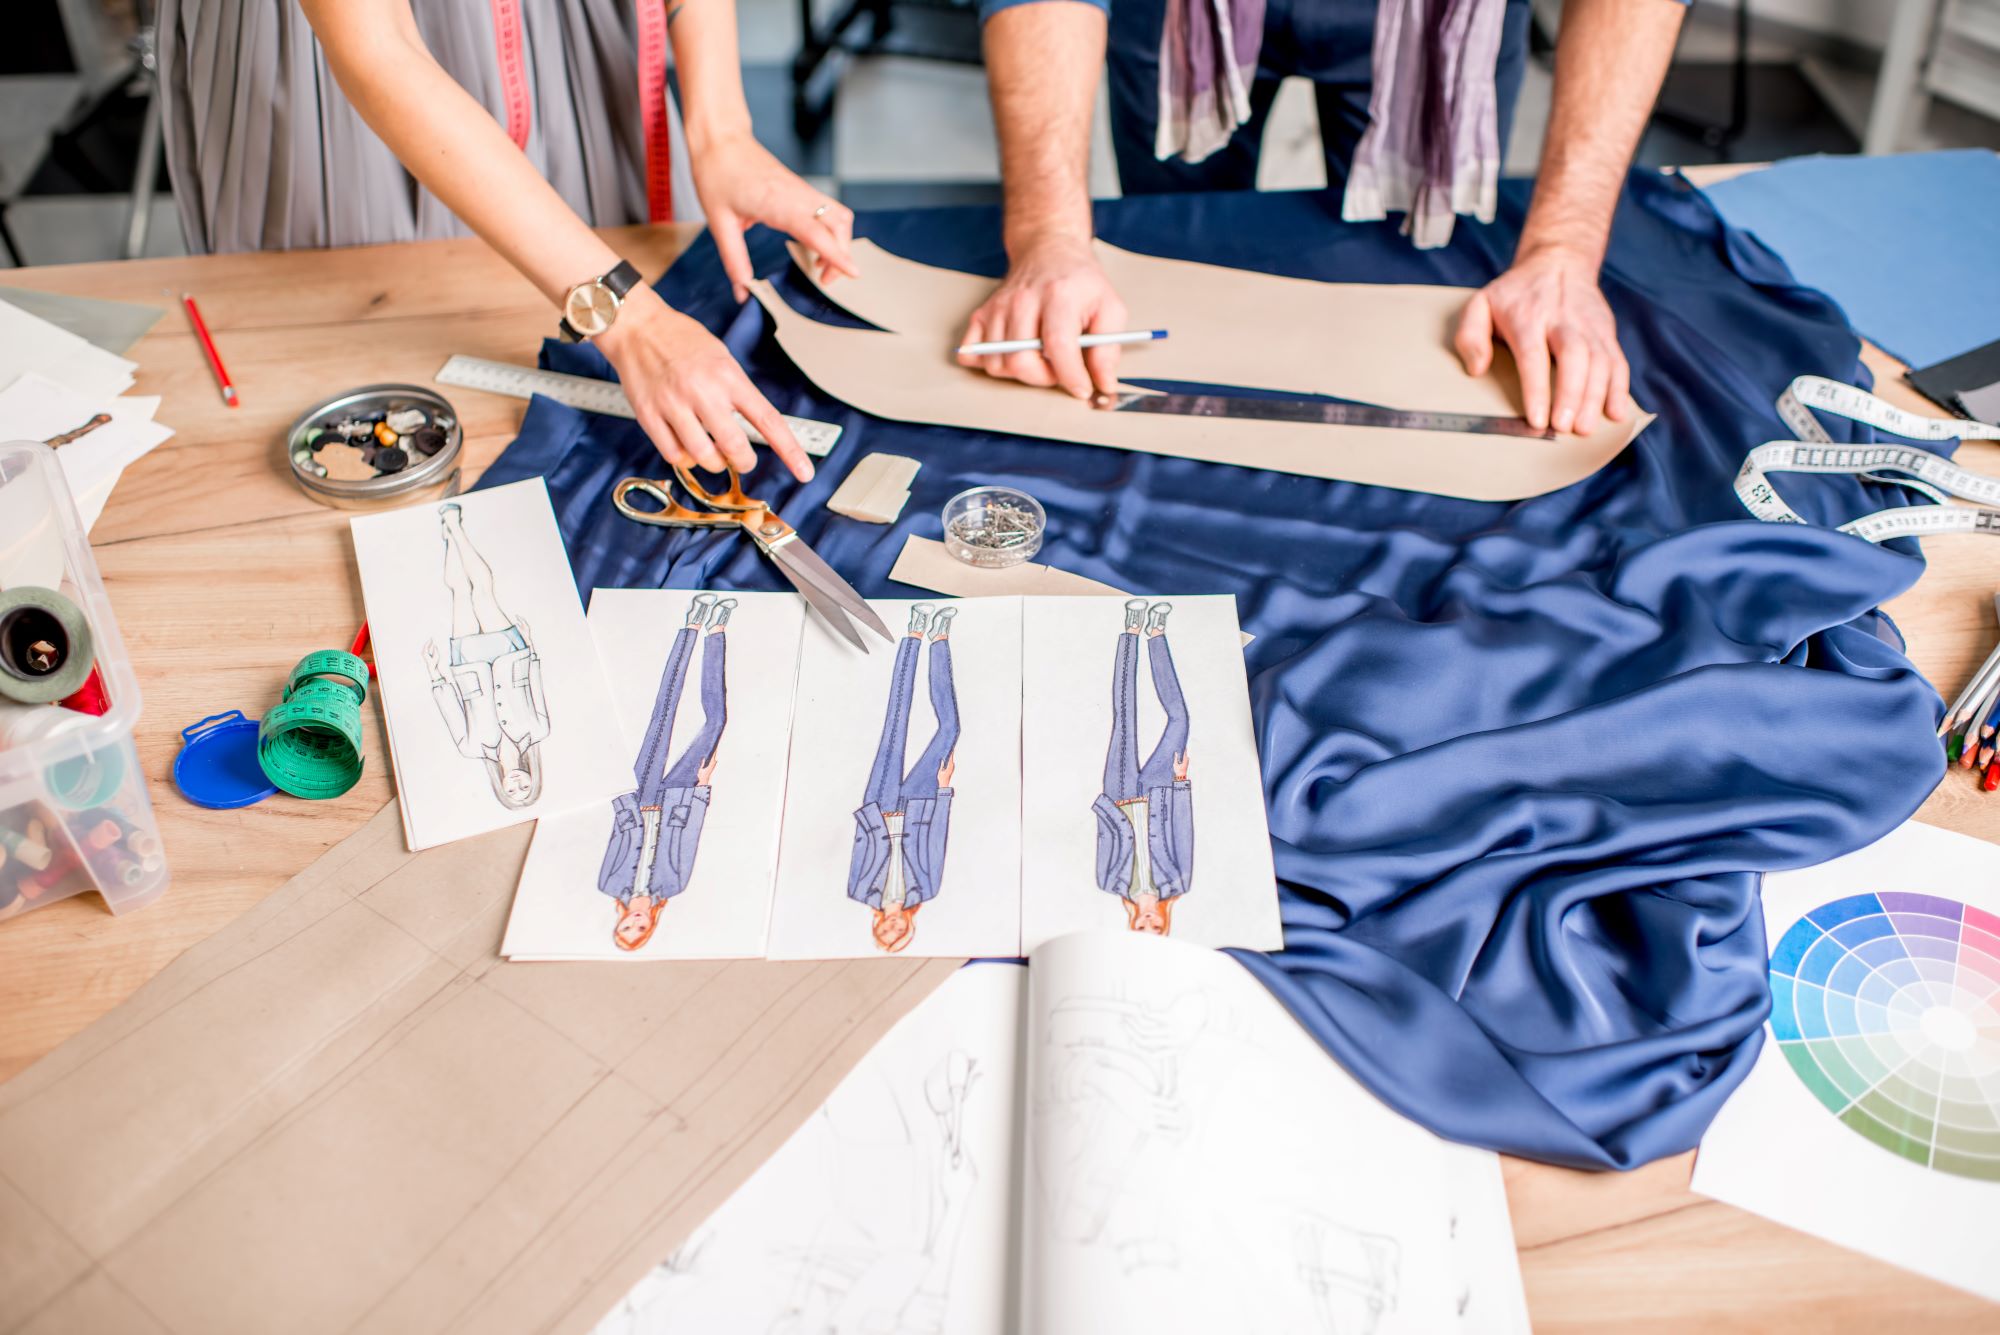 3 Tips For Starting An Indie Fashion Brand